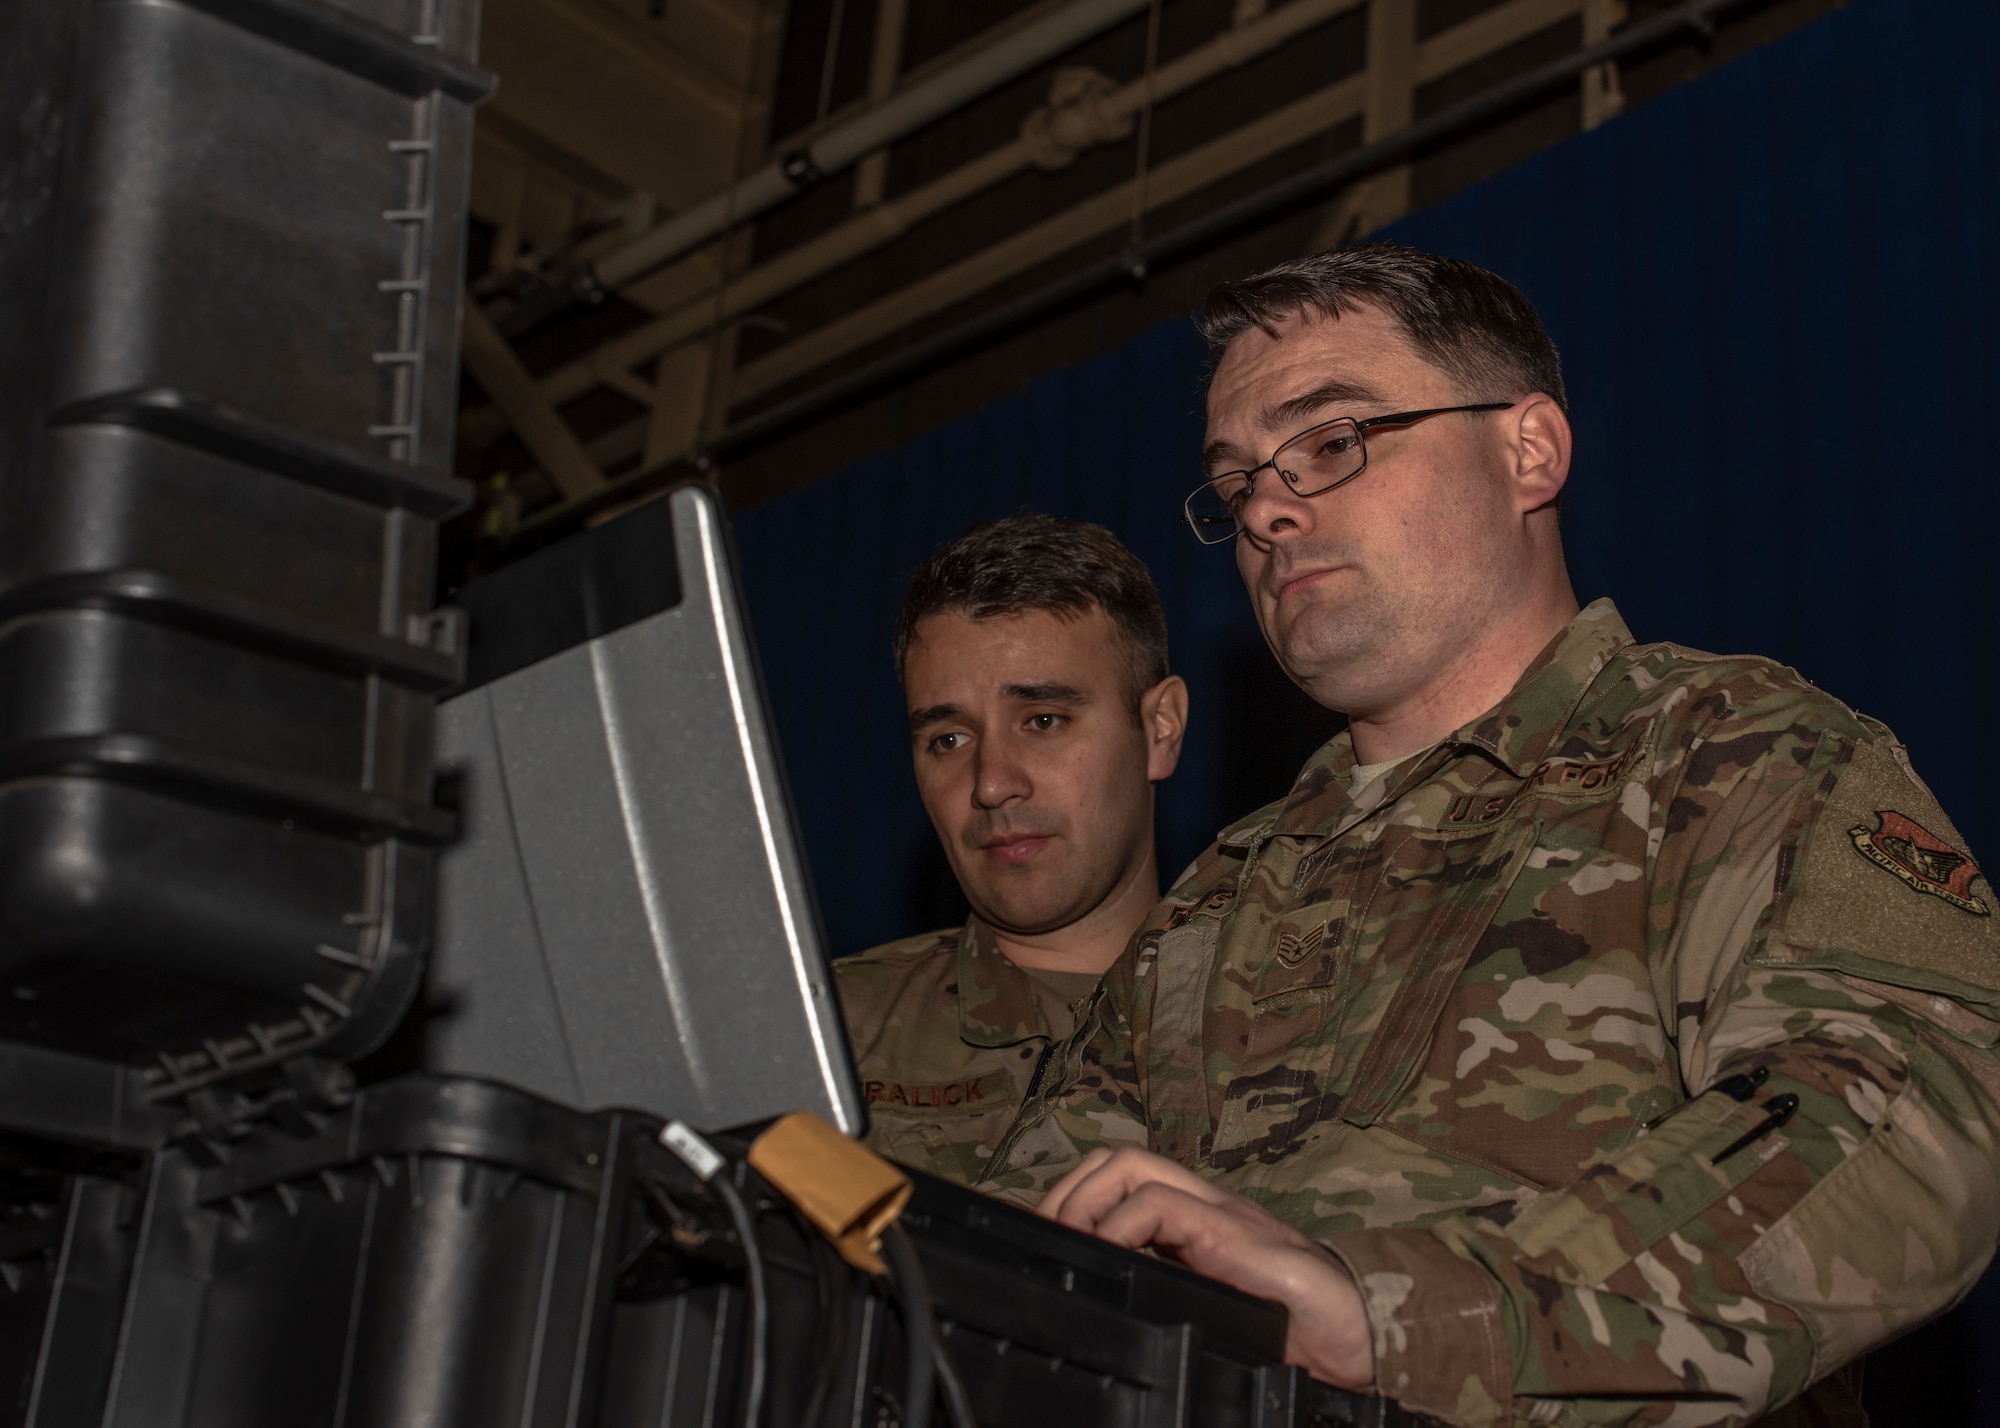 U.S. Air Force Tech. Sgt. Manuel Fralick, left, an outbound cargo NCO in charge, and Staff Sgt. James Davis, a cargo movement supervisor both with the 35th Logistics Readiness Squadron, review calculations at Misawa Air Base, Japan, March 13, 2020. The new laser profile system allowed the cargo deployment function to validate the measurements, weight and center of balance of cargo moves for exercises, deployments and day-to-day operations in an expedient matter, increasing work efficiency. (U.S. Air Force photo by Airman 1st Class China M. Shock)